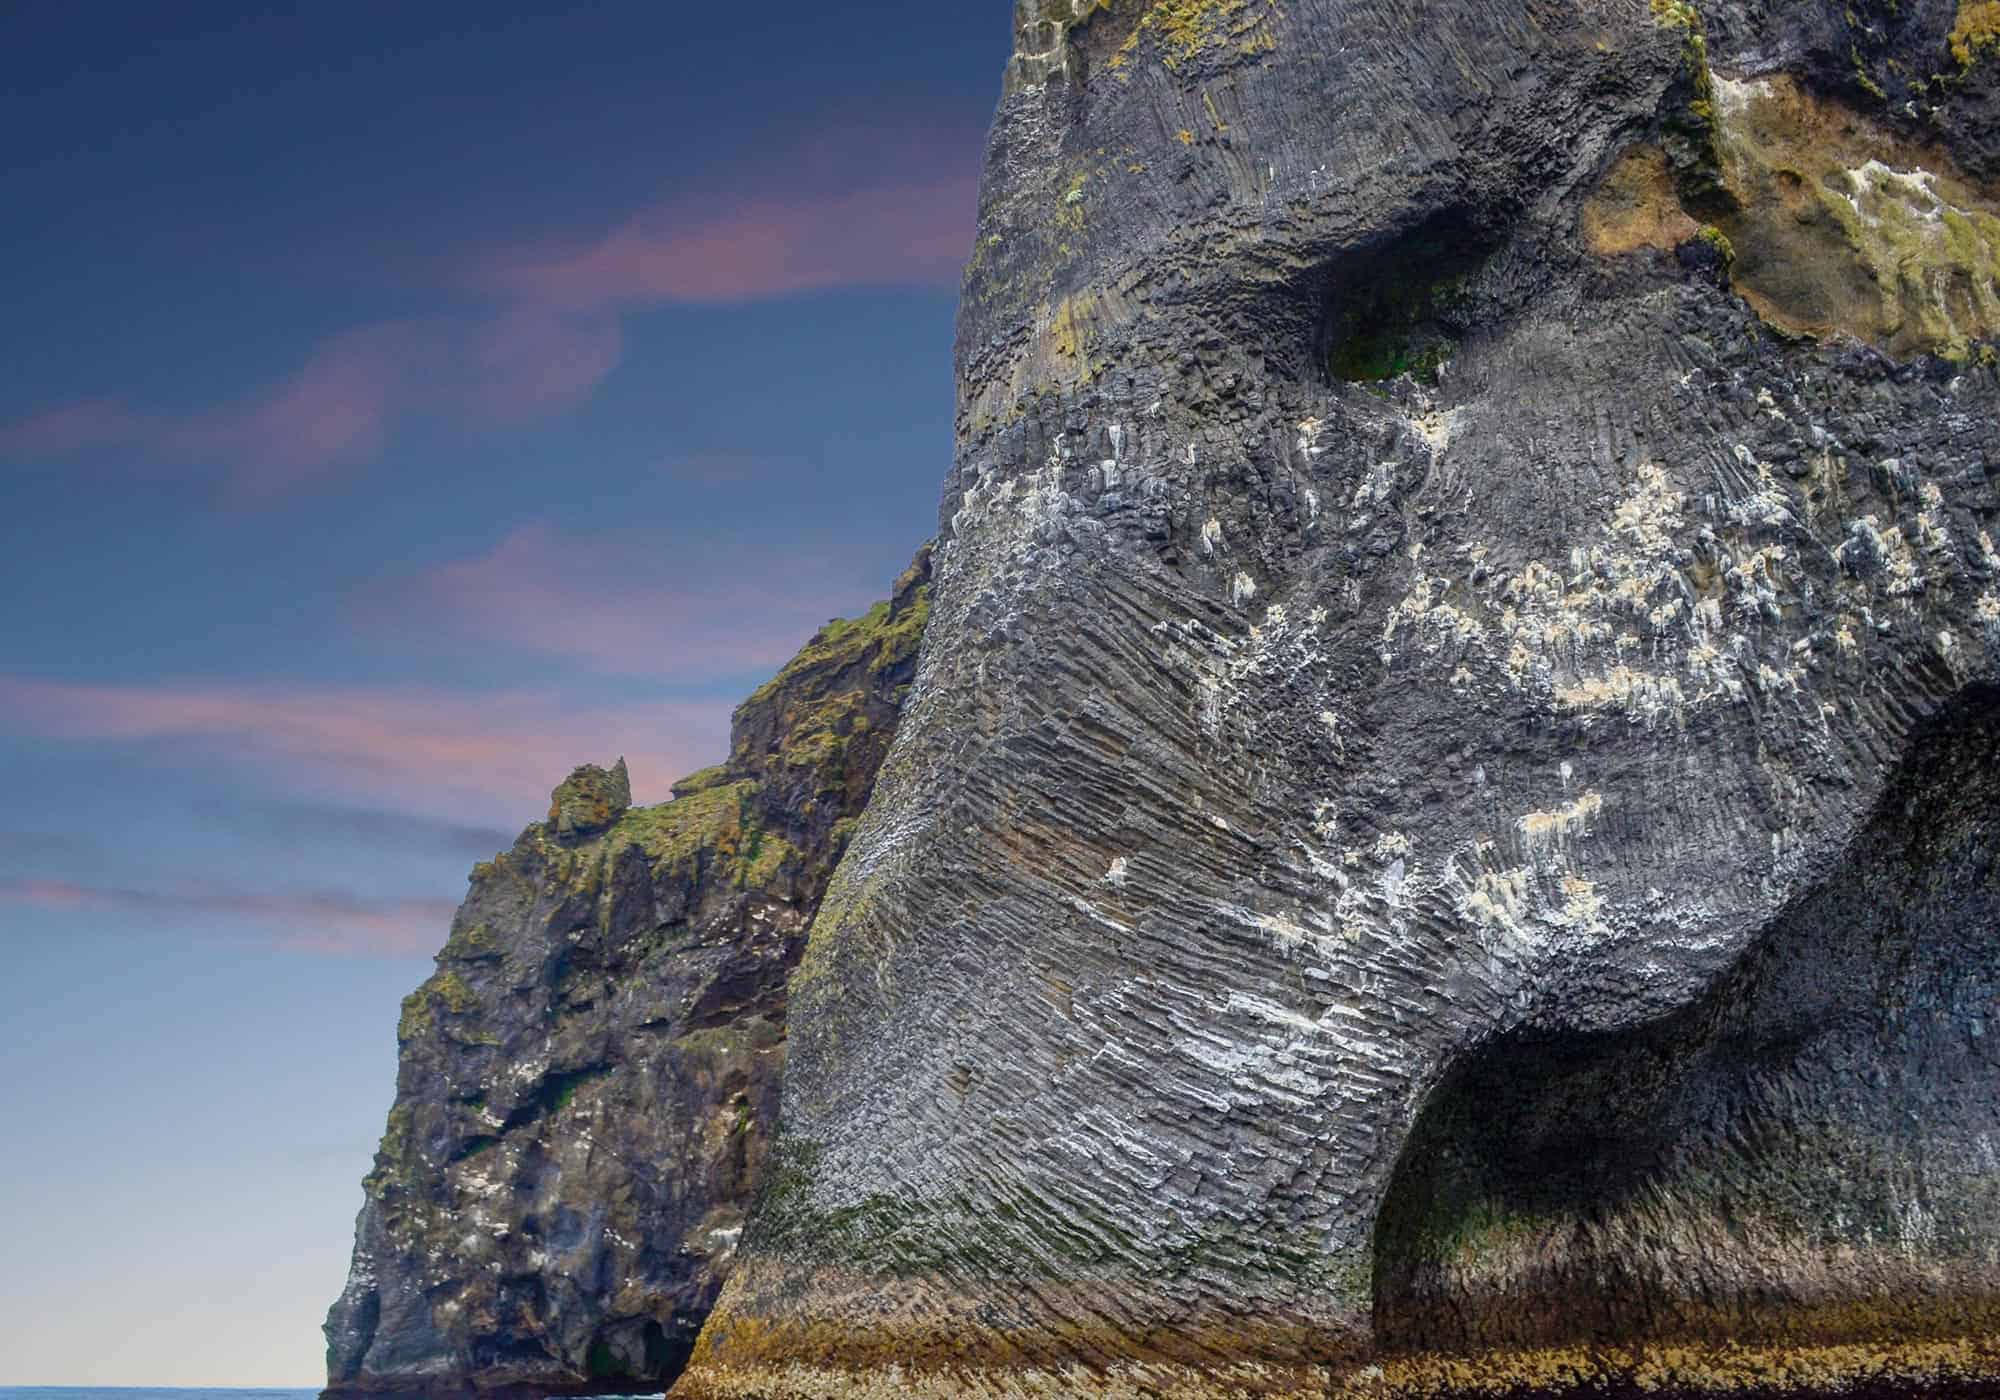 The elephant rock at the Westman Islands in south Iceland.